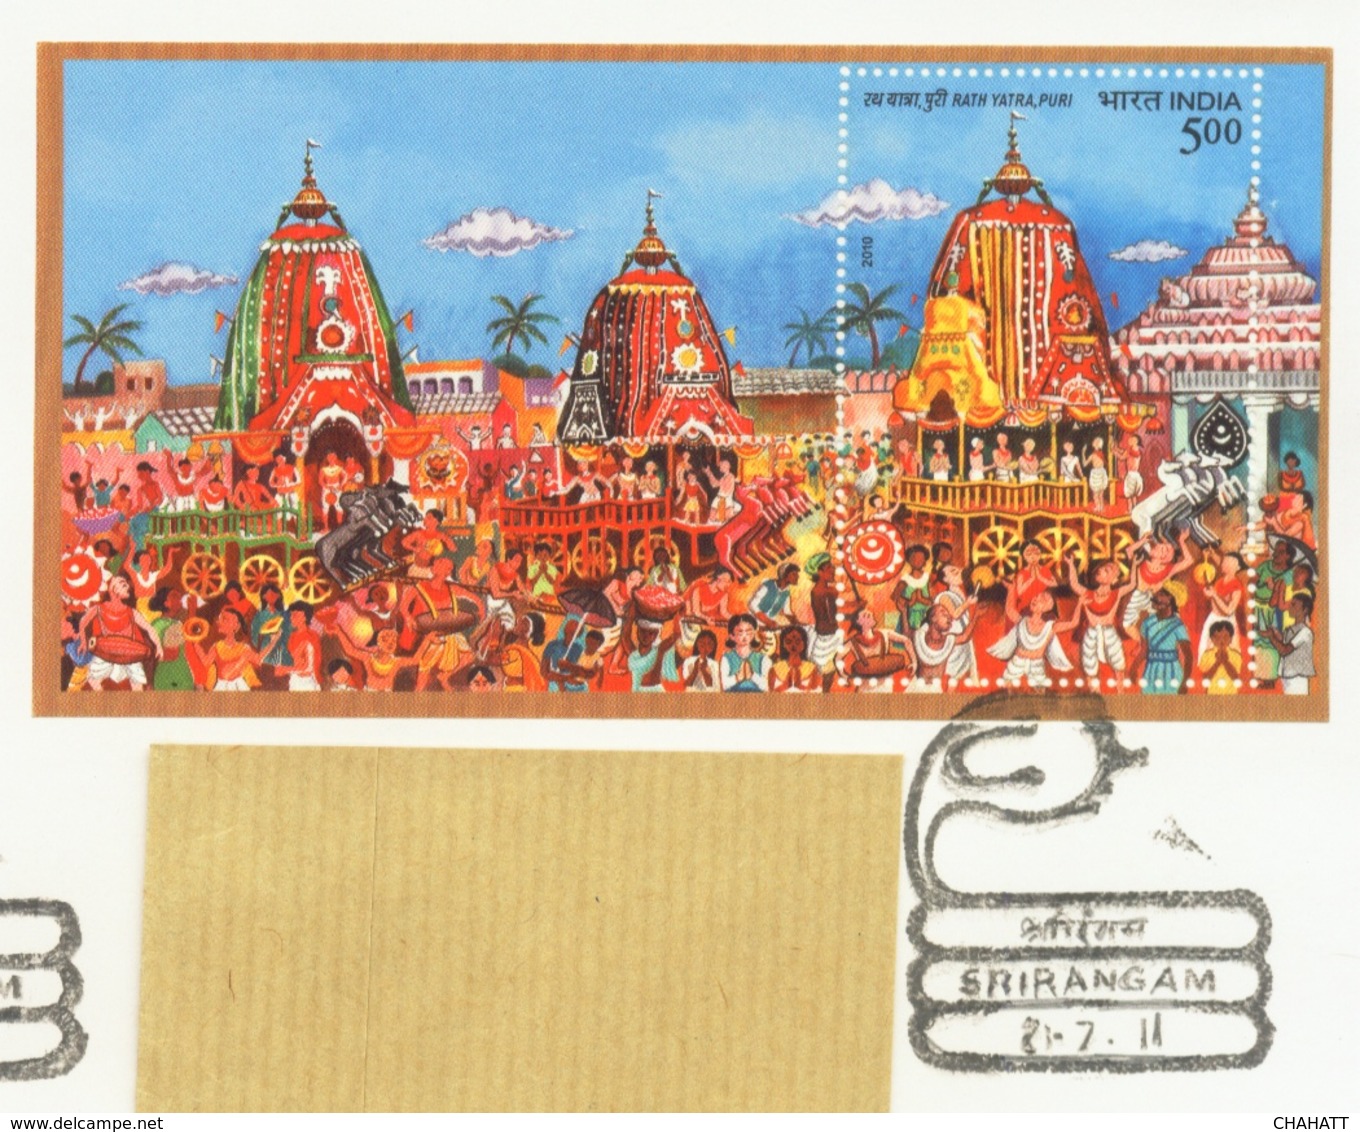 RELIGION-HINDUISM-LORD VISHBU AND HIS SNAKE-RATH YATRA-MS ON COVER-PICTORIAL CANCELLATION-PHILATELIC COVER-2011-IC-233-3 - Hinduism